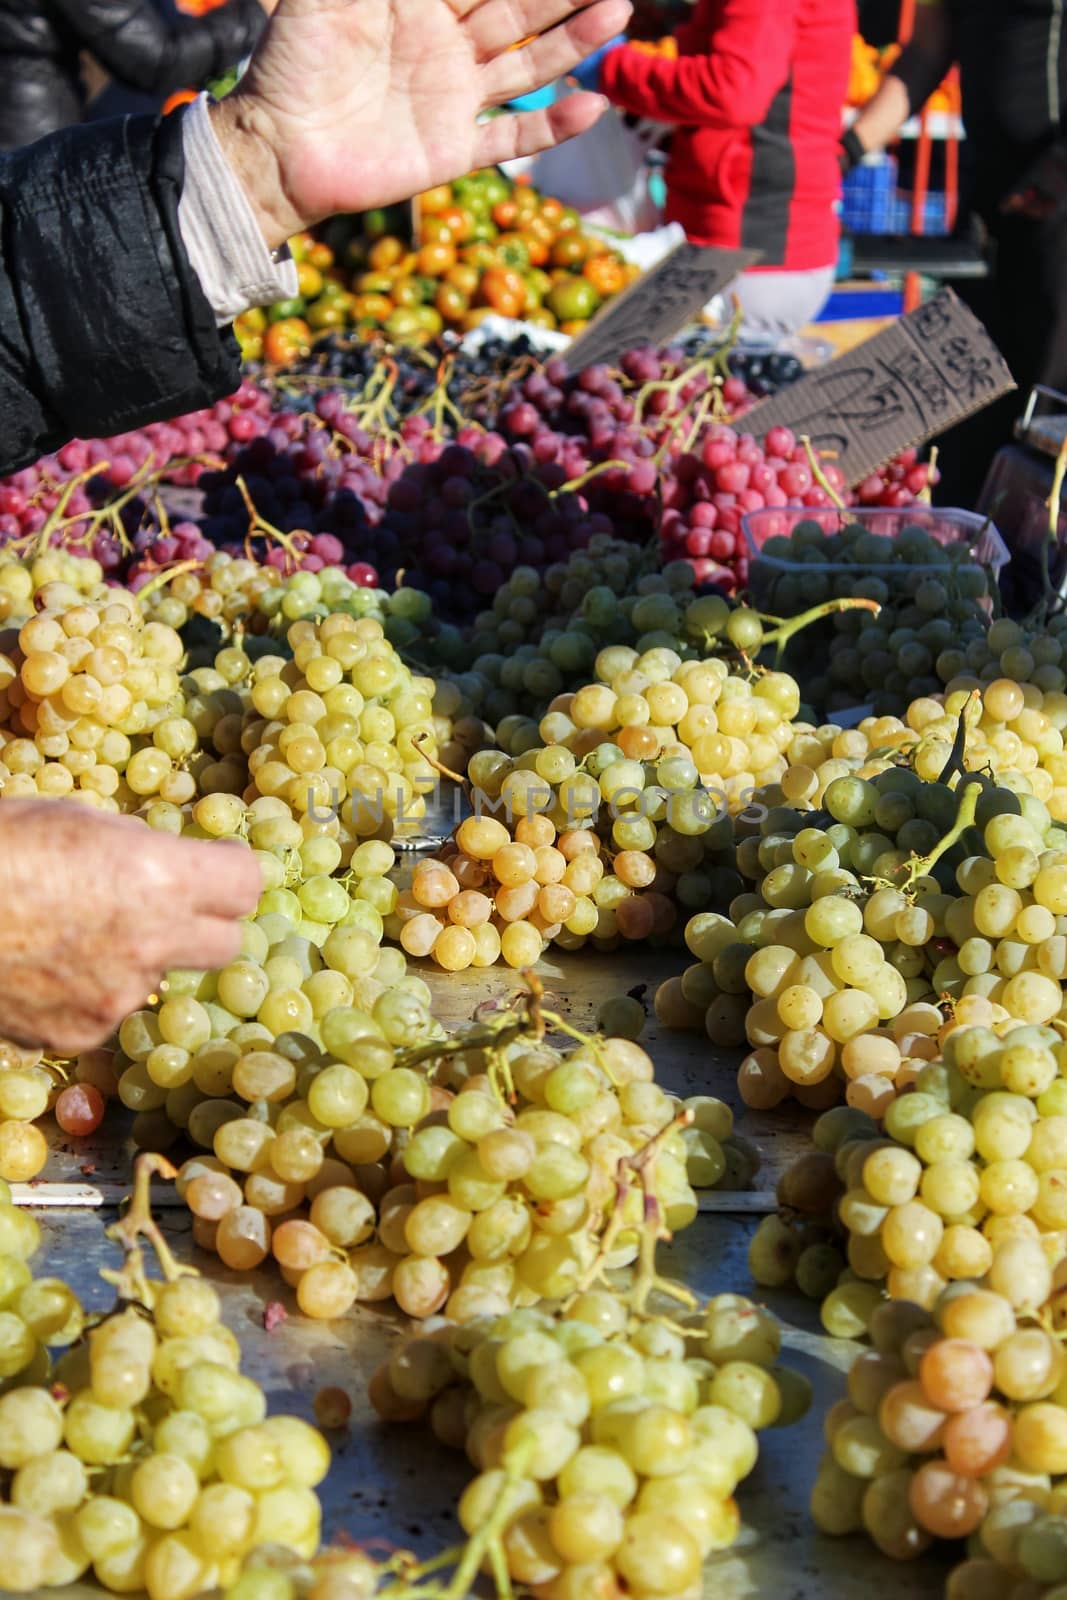 Cluster of grapes at a market stall by soniabonet